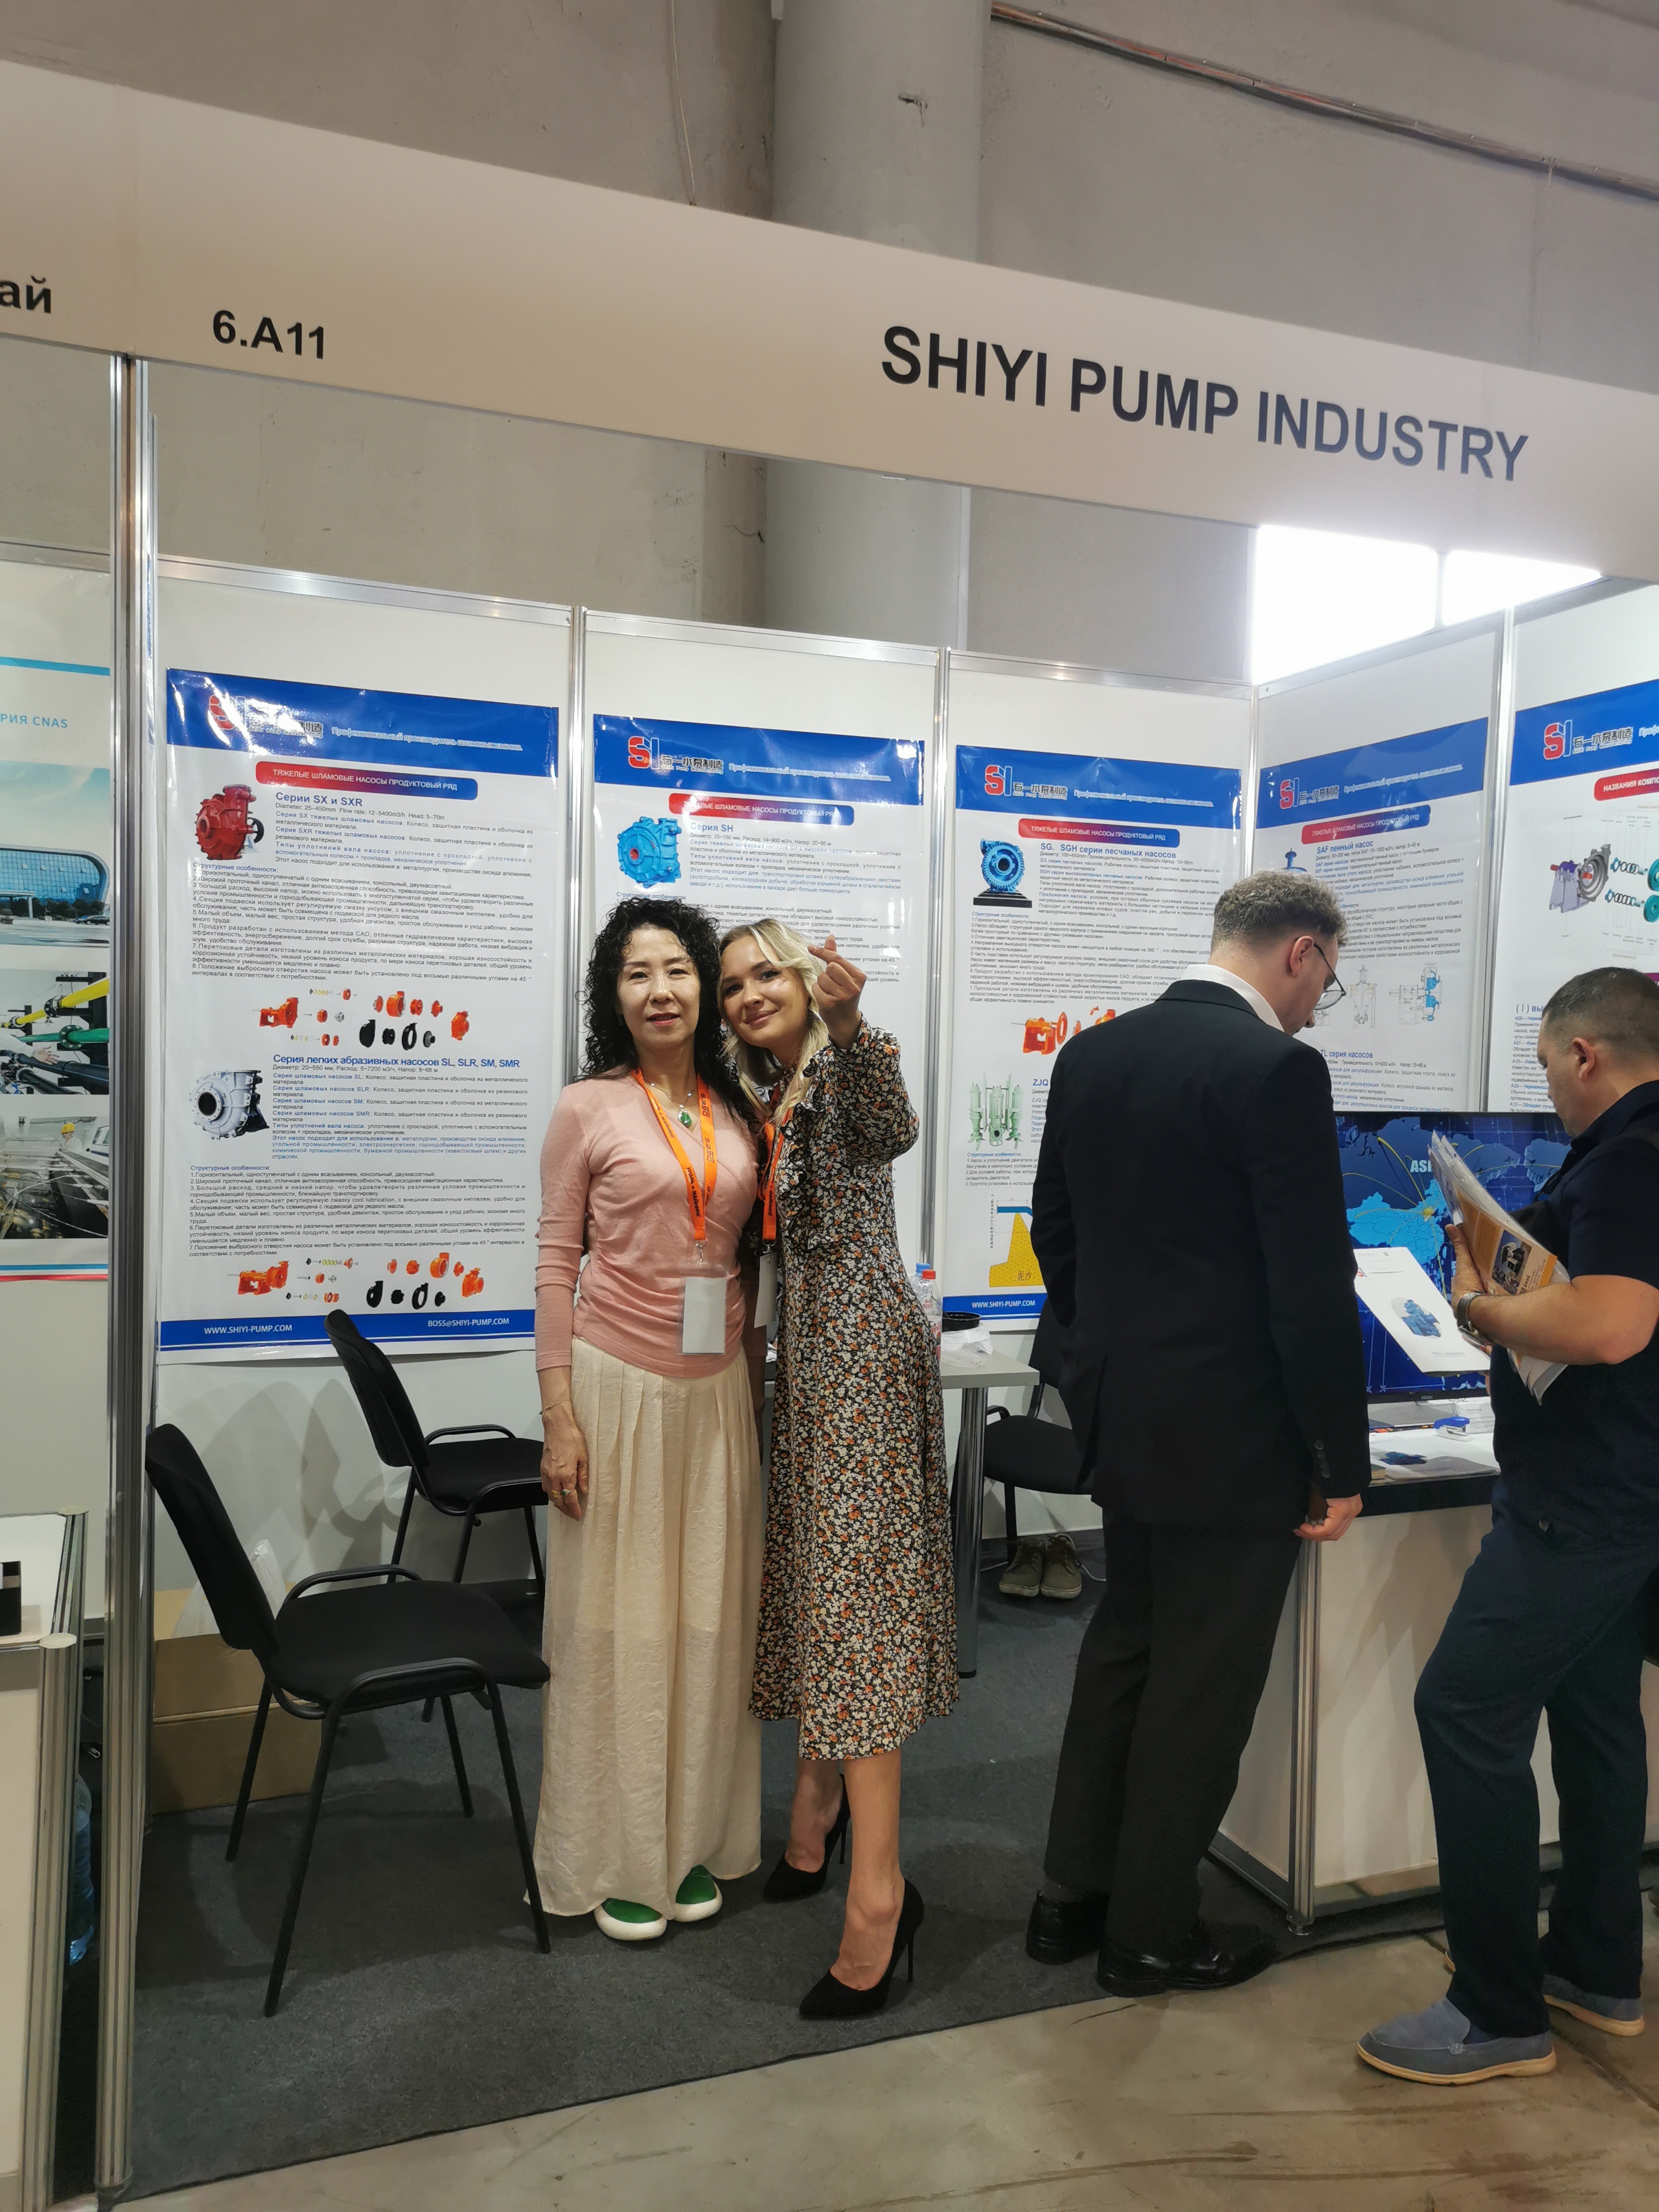 Attend the Russia International Mining Exhibition